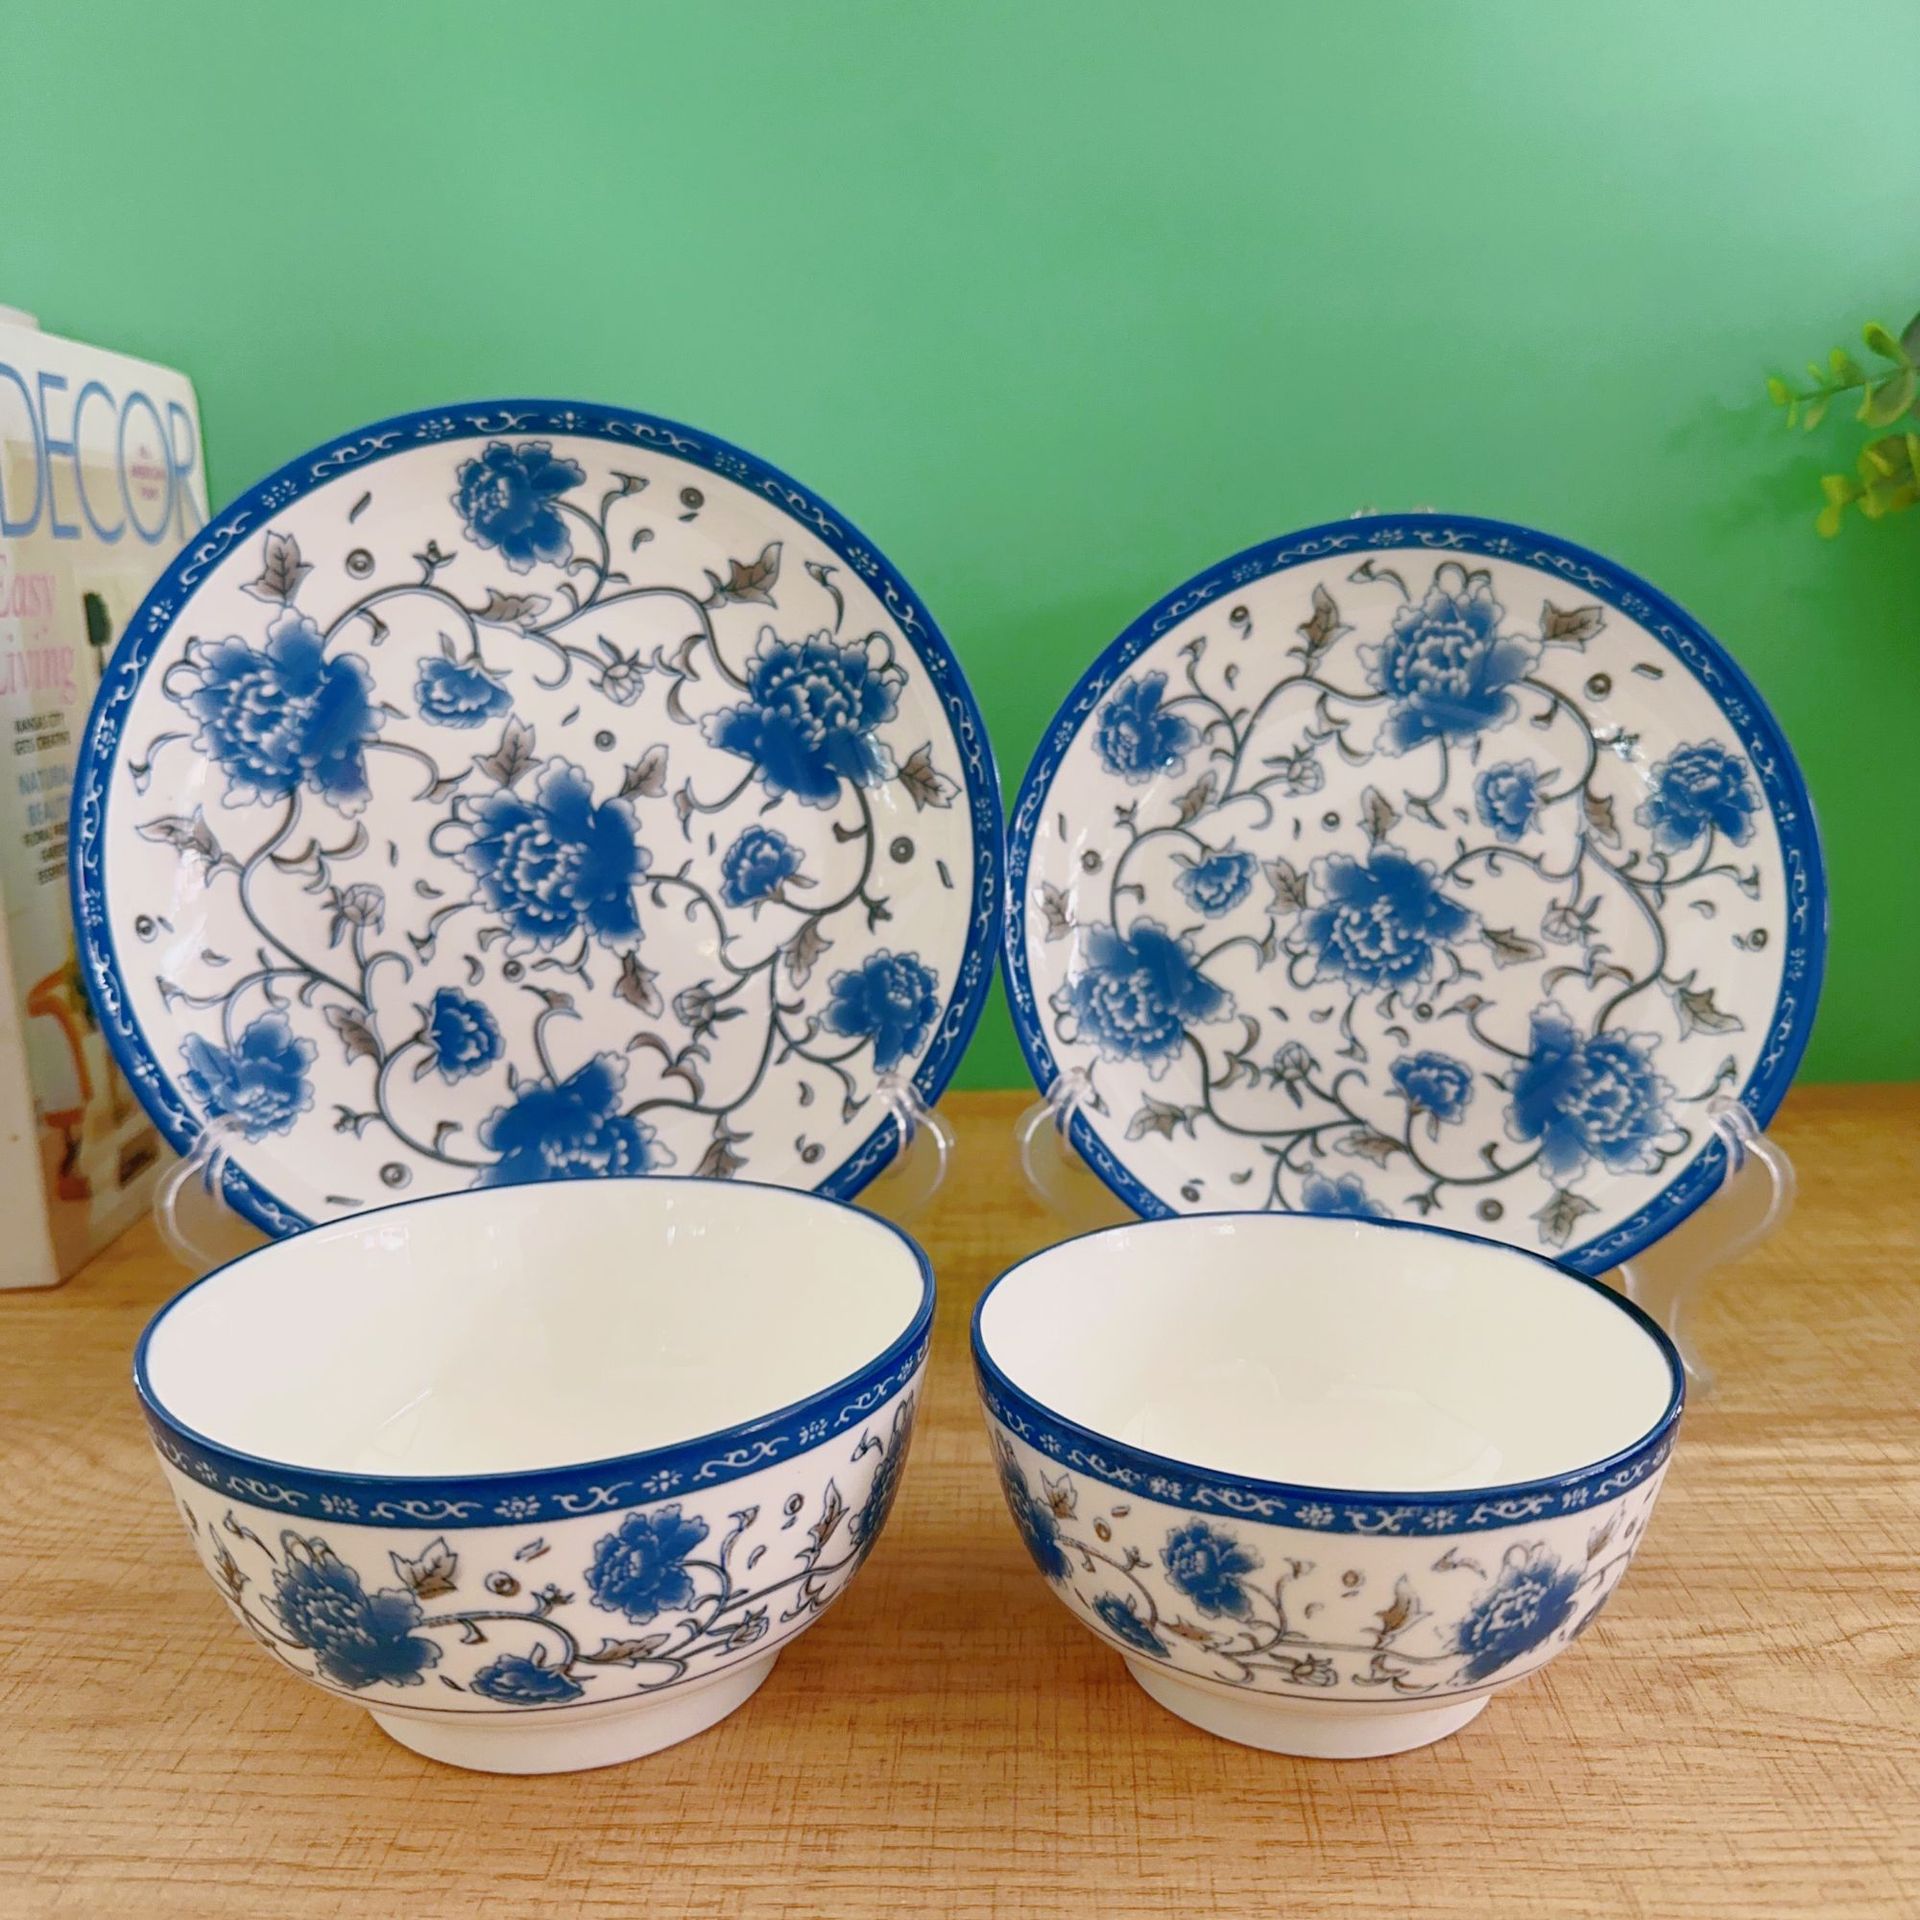 peony blossom household plate rice bowl dinner plate fruit plate ins retro blue and white tableware